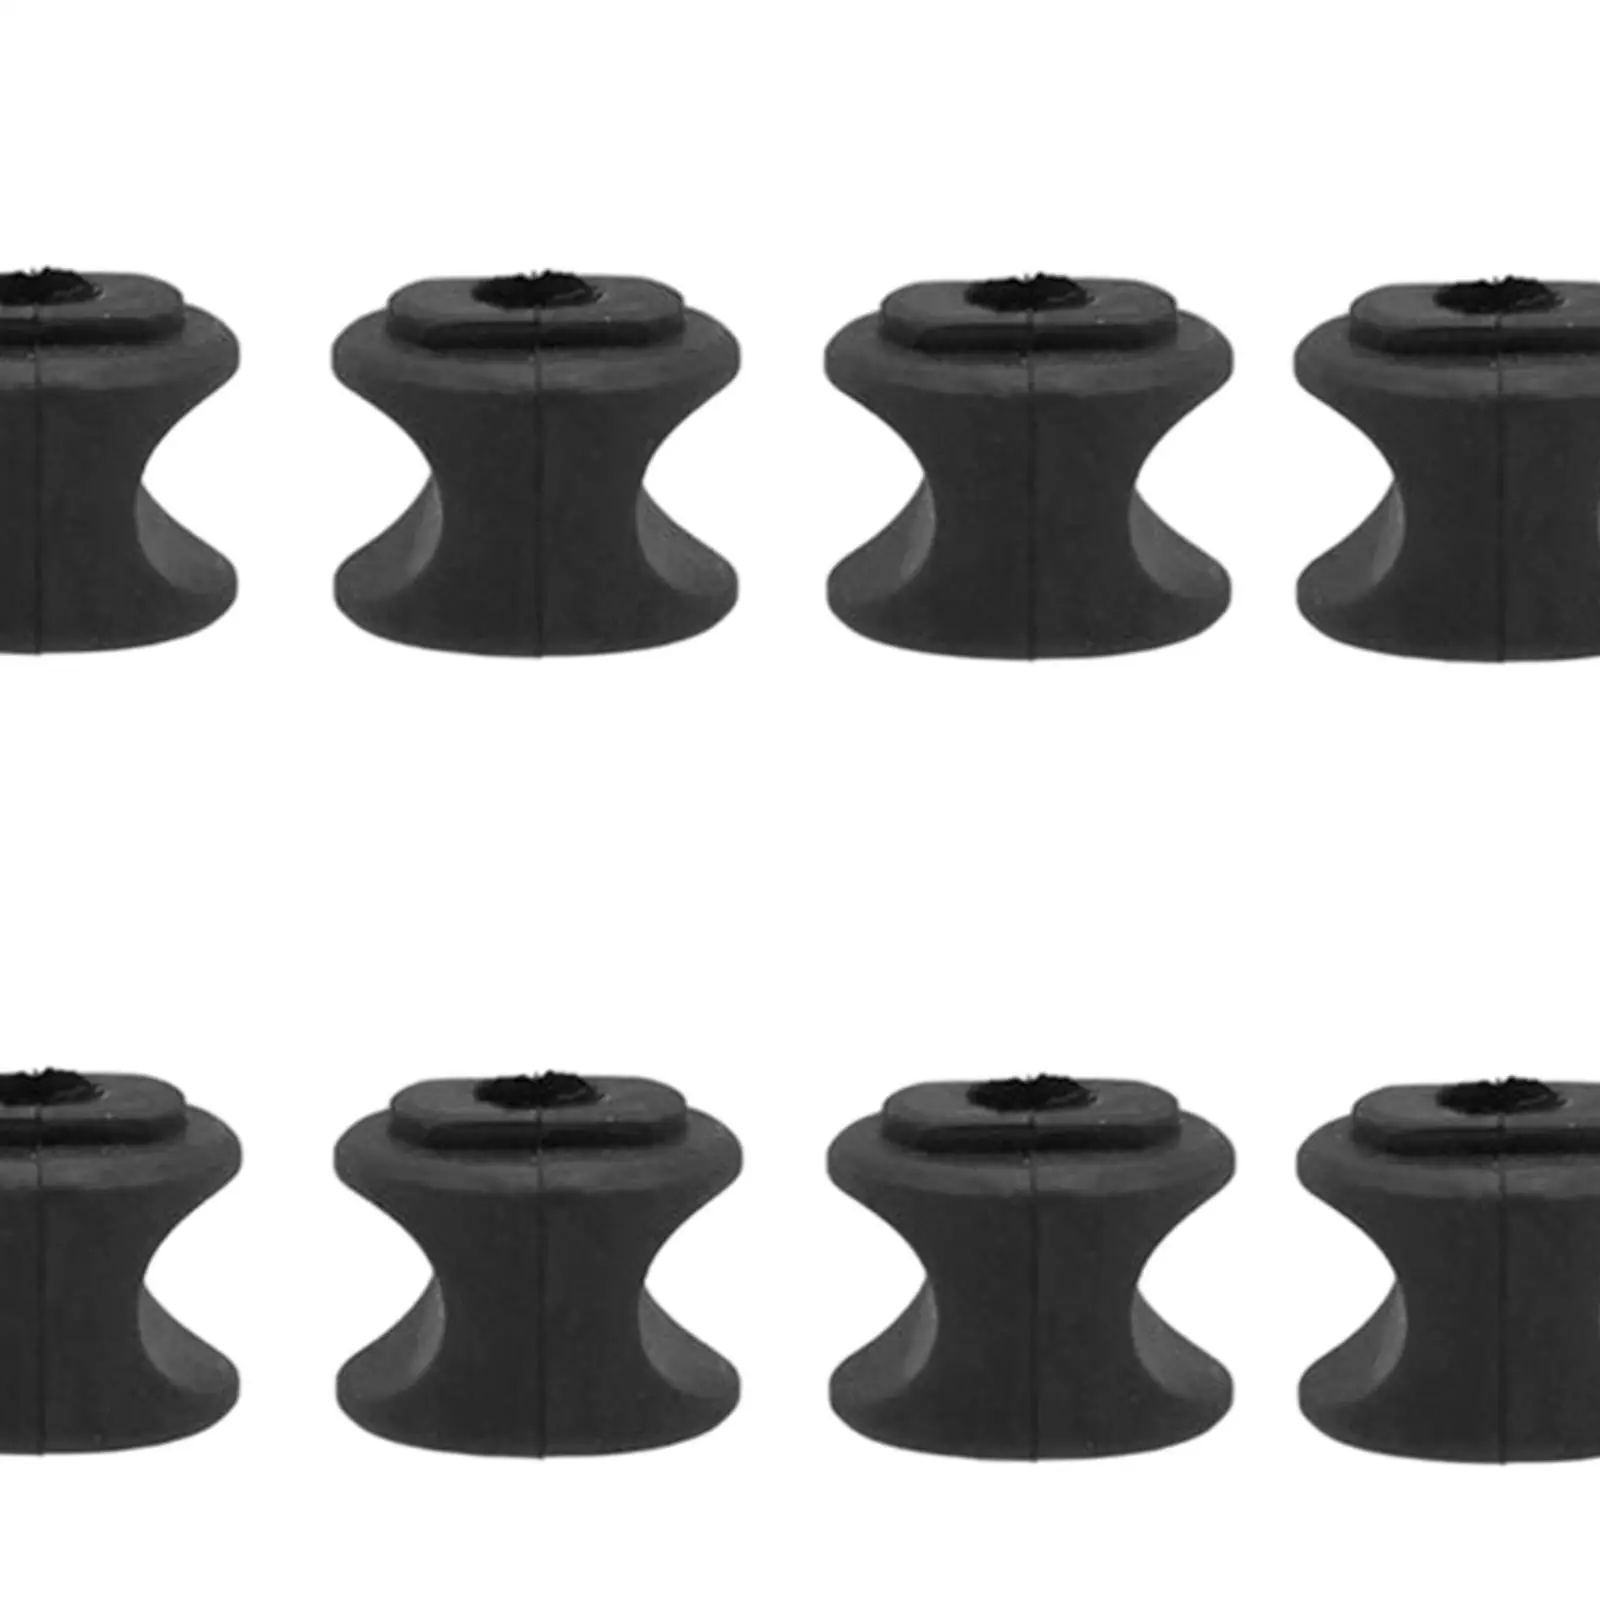 8x Rear Stabilizer Support Bushing Fit for W204 W212 W221 x204 Accessories